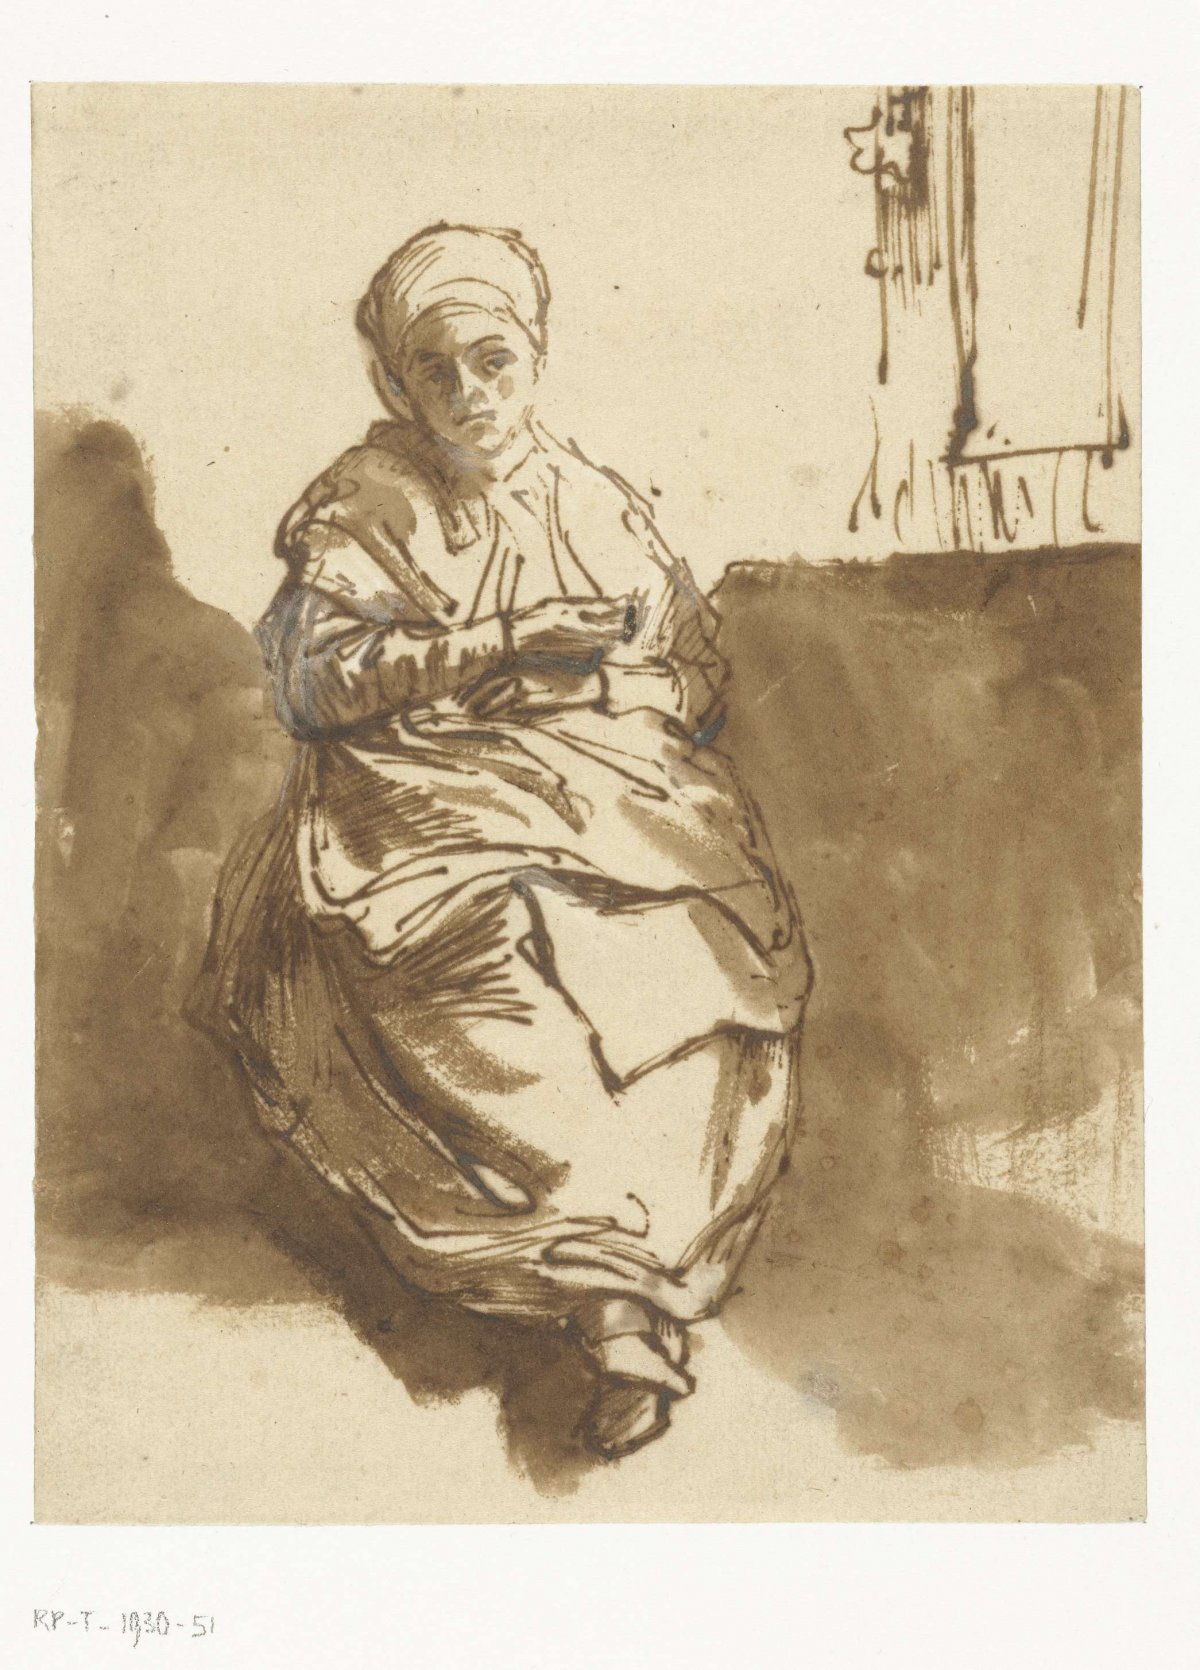 Young Woman Seated by a Window (Saskia?), Rembrandt van Rijn, c. 1638